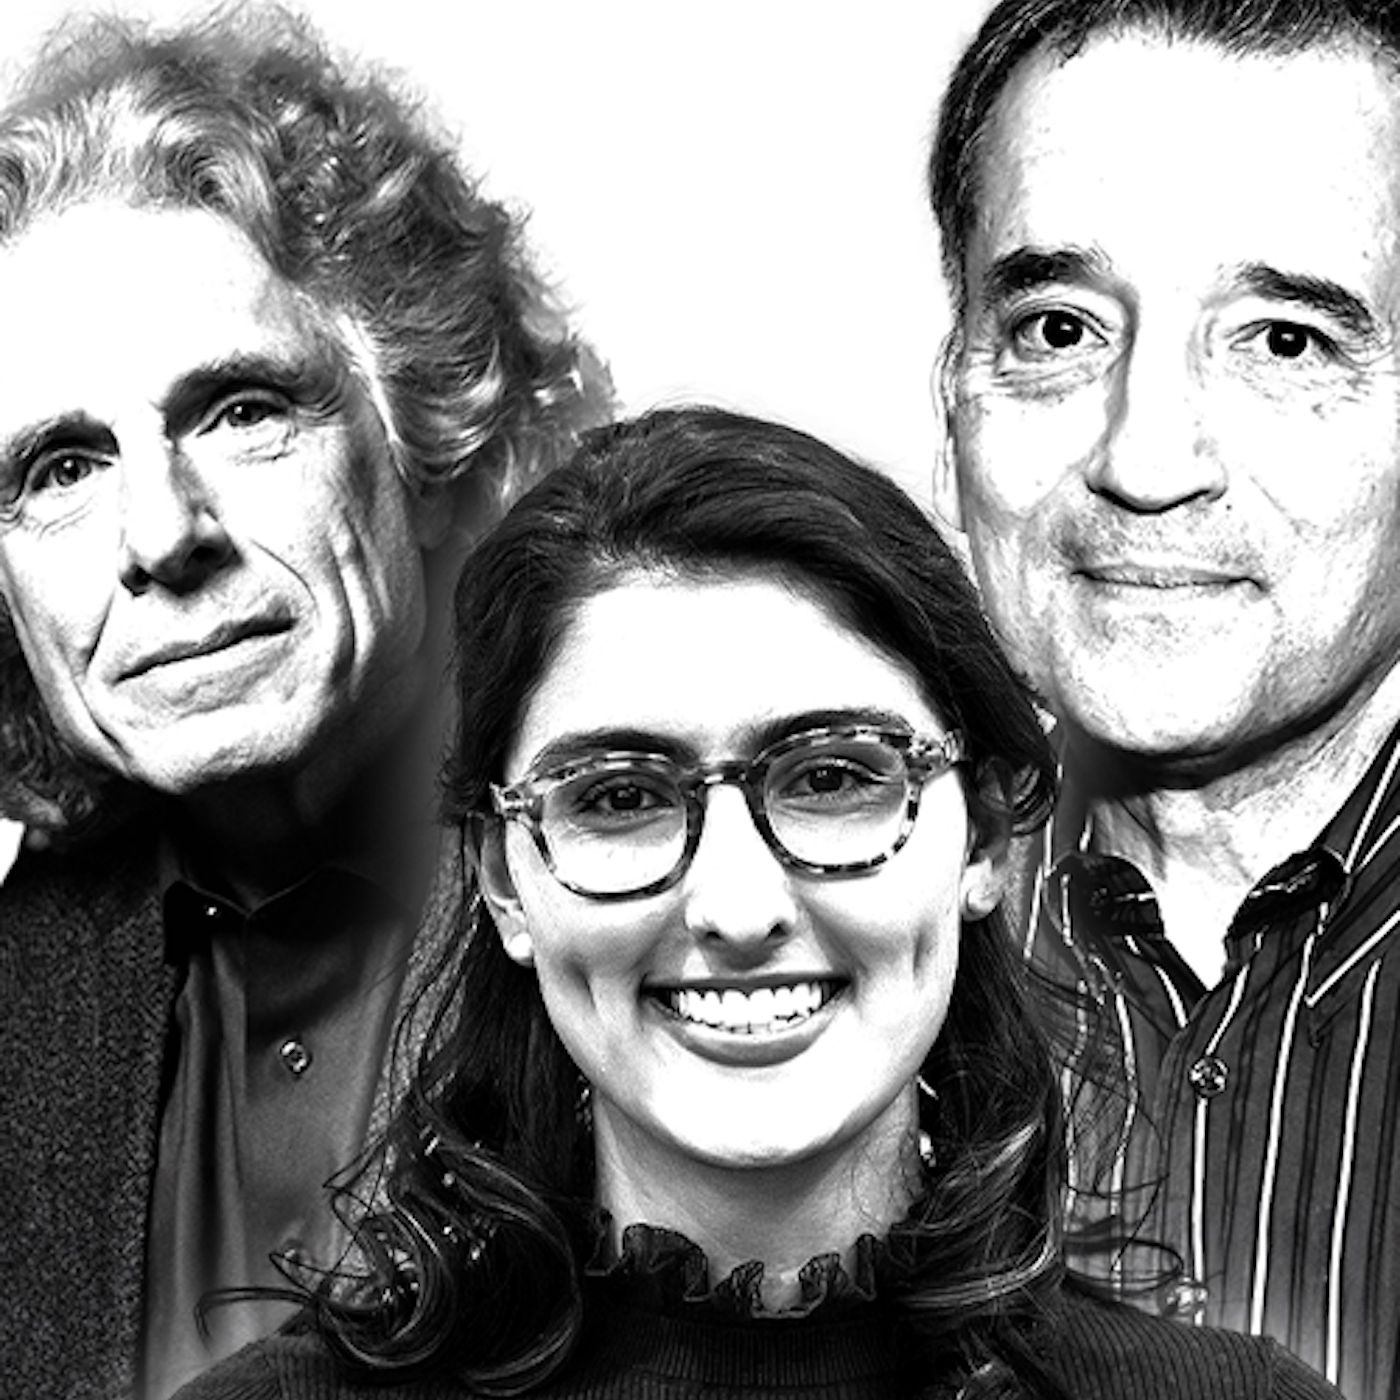 What’s Next: Higher Education for Jews: David Wolpe, Talia Khan, and Steven Pinker